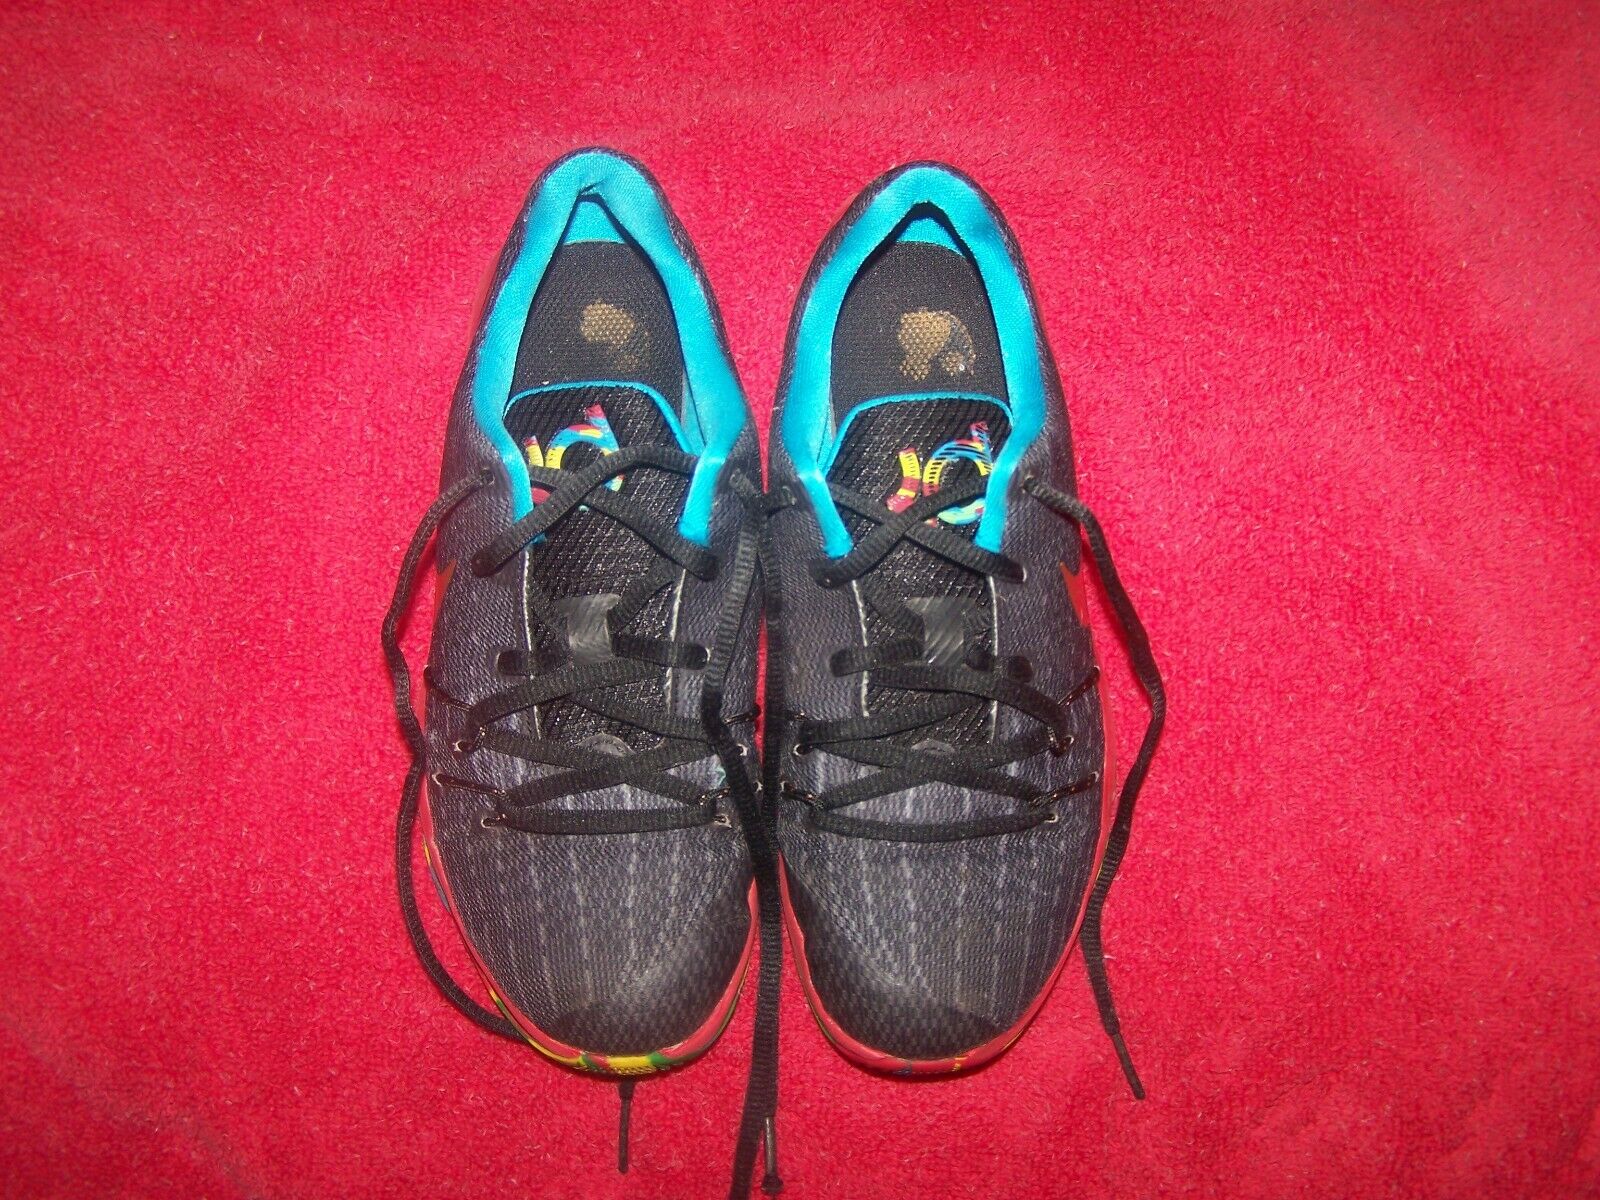 Nike Kd Sneakers Size 2.5 Youth